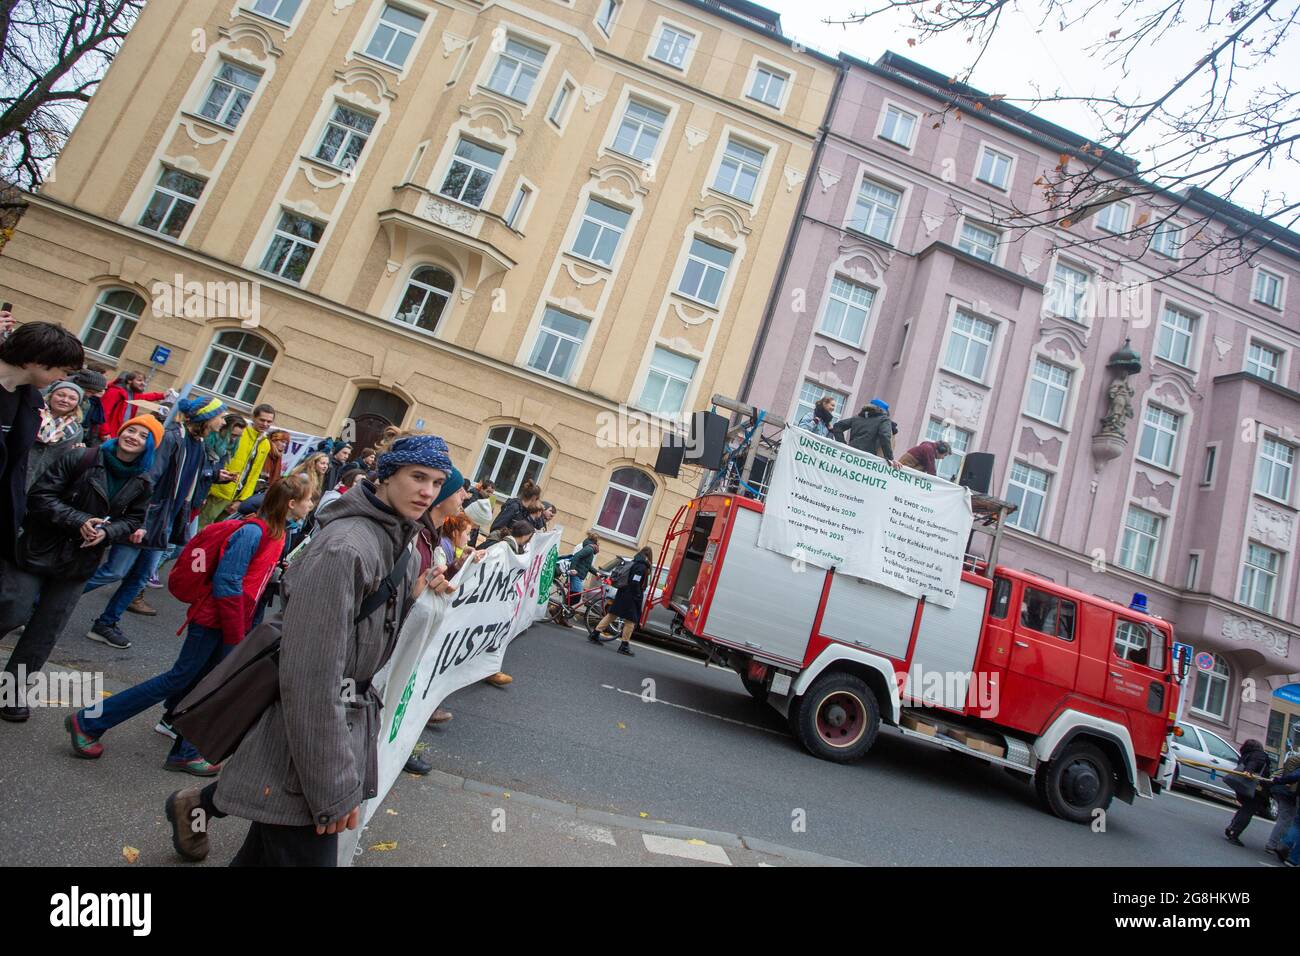 On 22. November 2019 again hundreds of young people demonstrated for Climate Justice. They demonstrated in front of the different Munich Universities. (Photo by Alexander Pohl/Sipa USA) Credit: Sipa USA/Alamy Live News Stock Photo